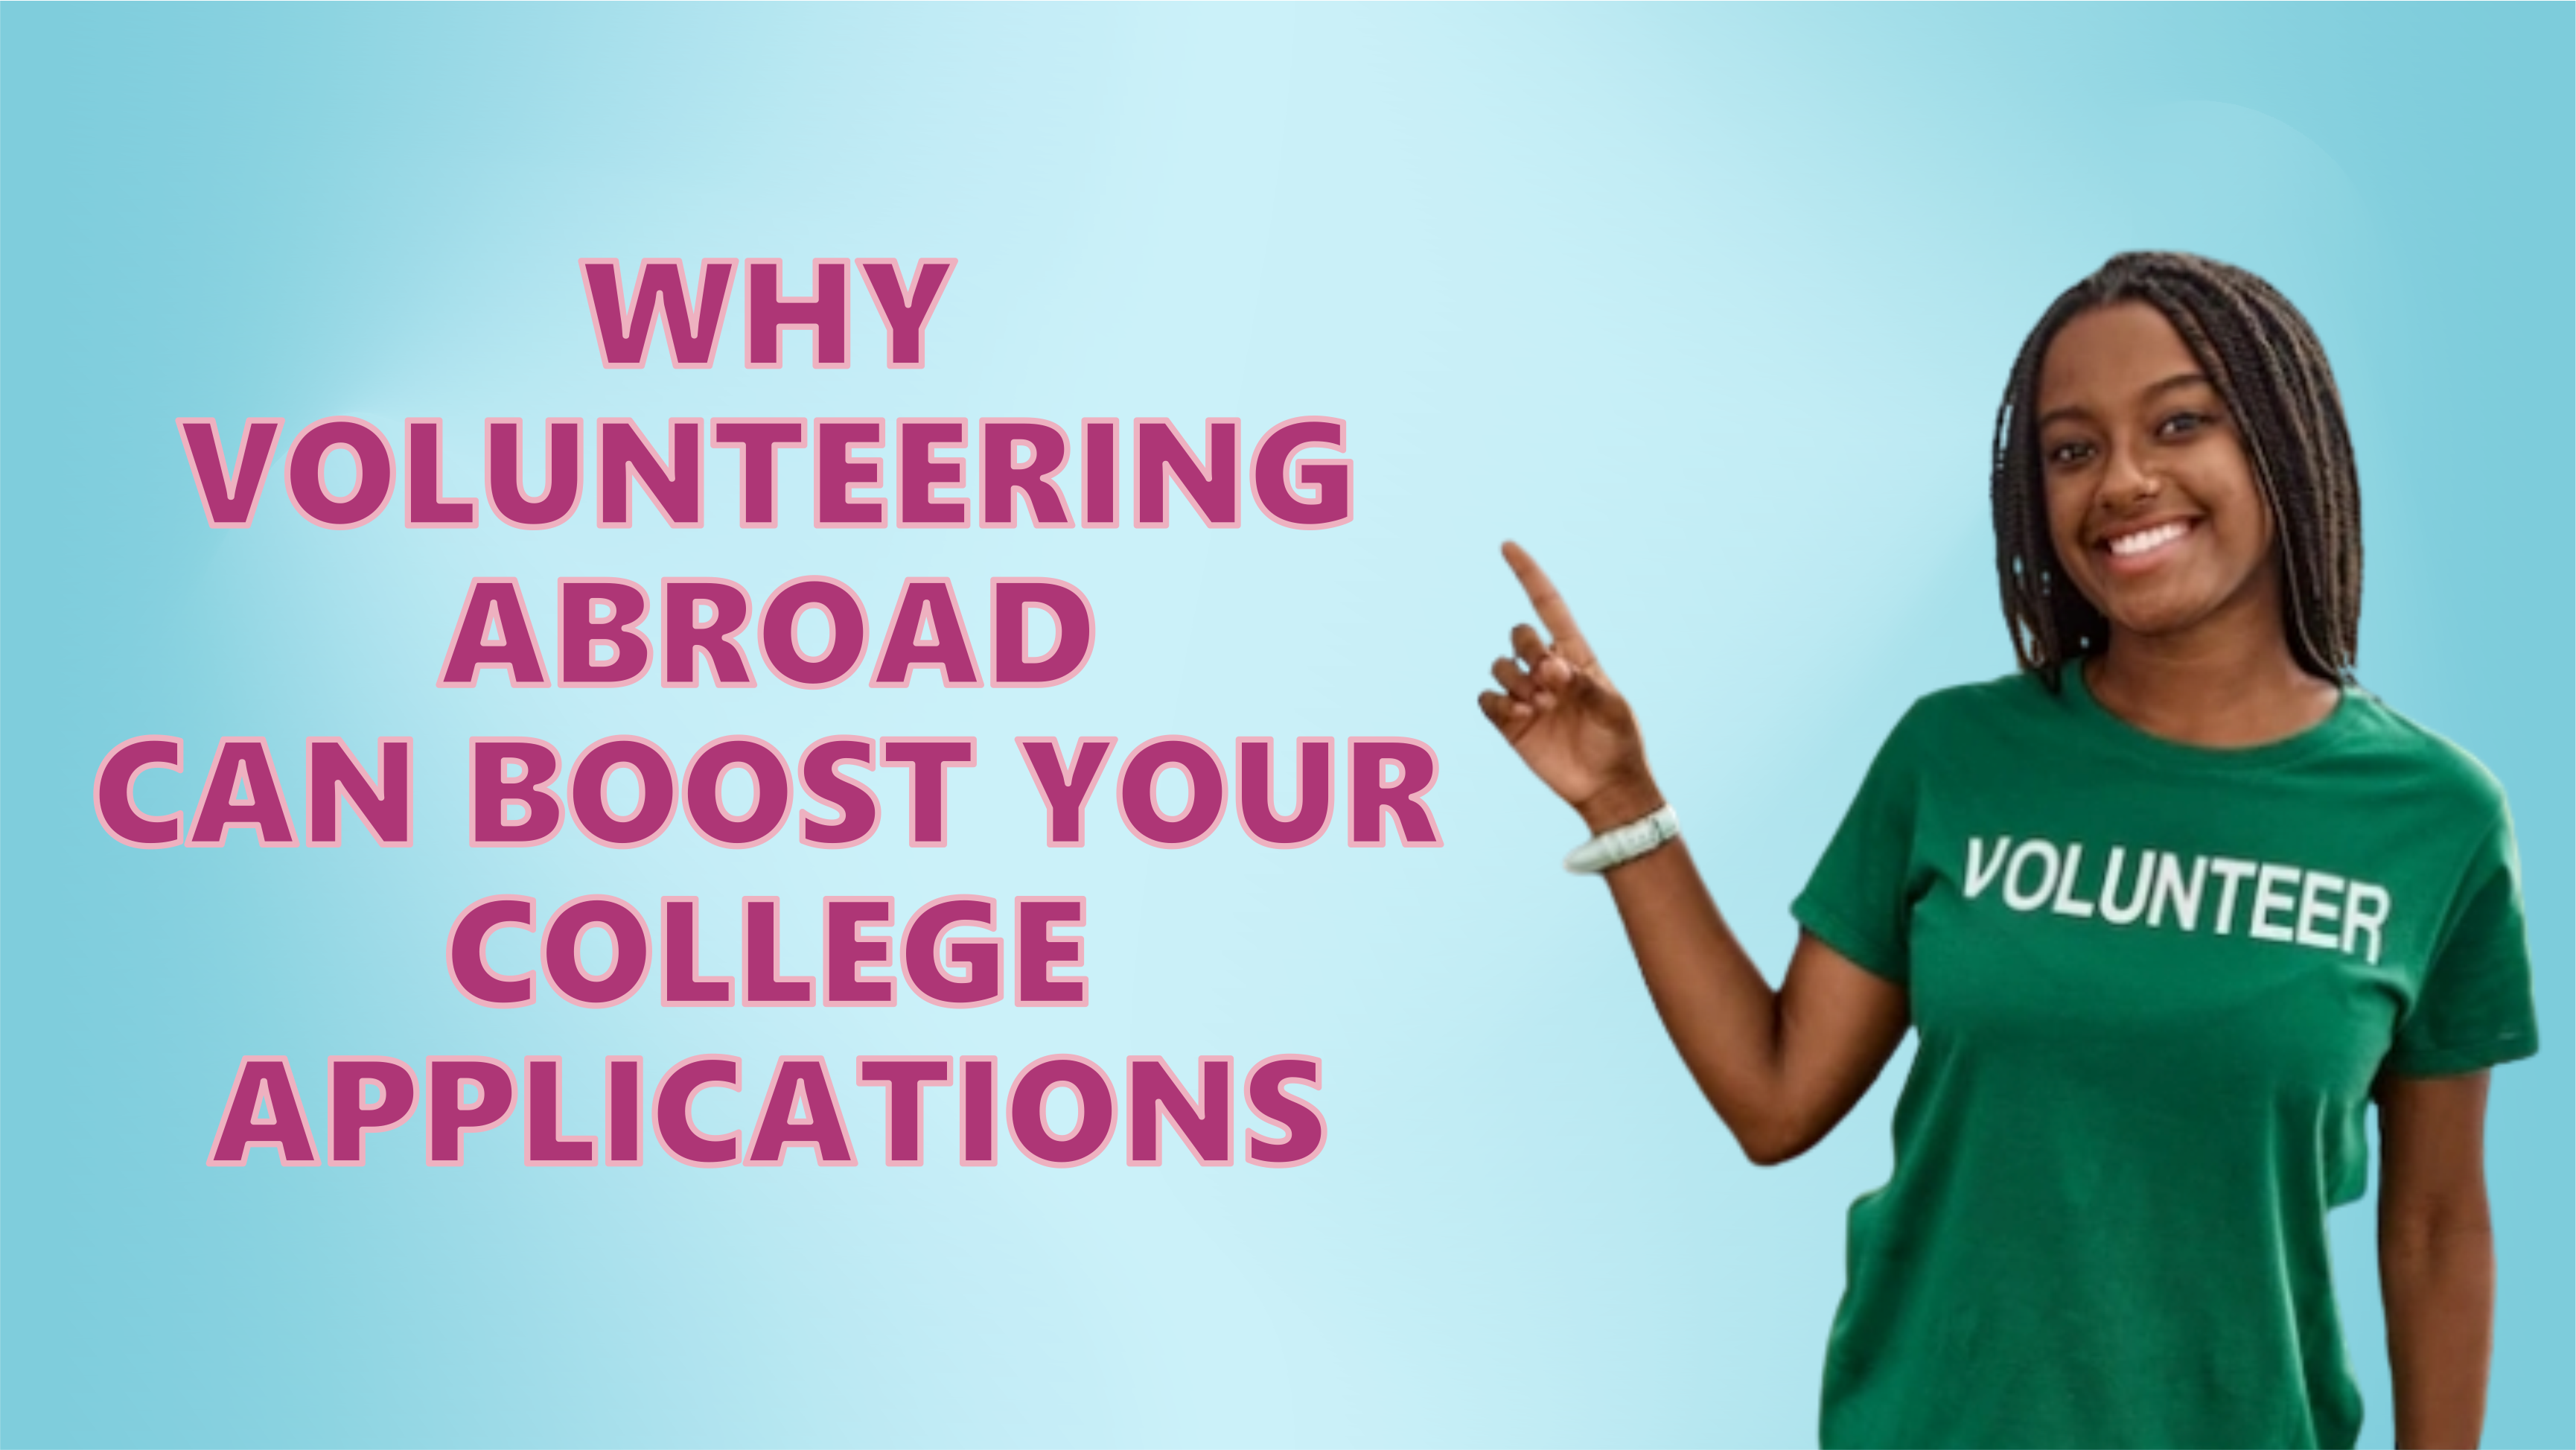 Why volunteering abroad can boost your college applications